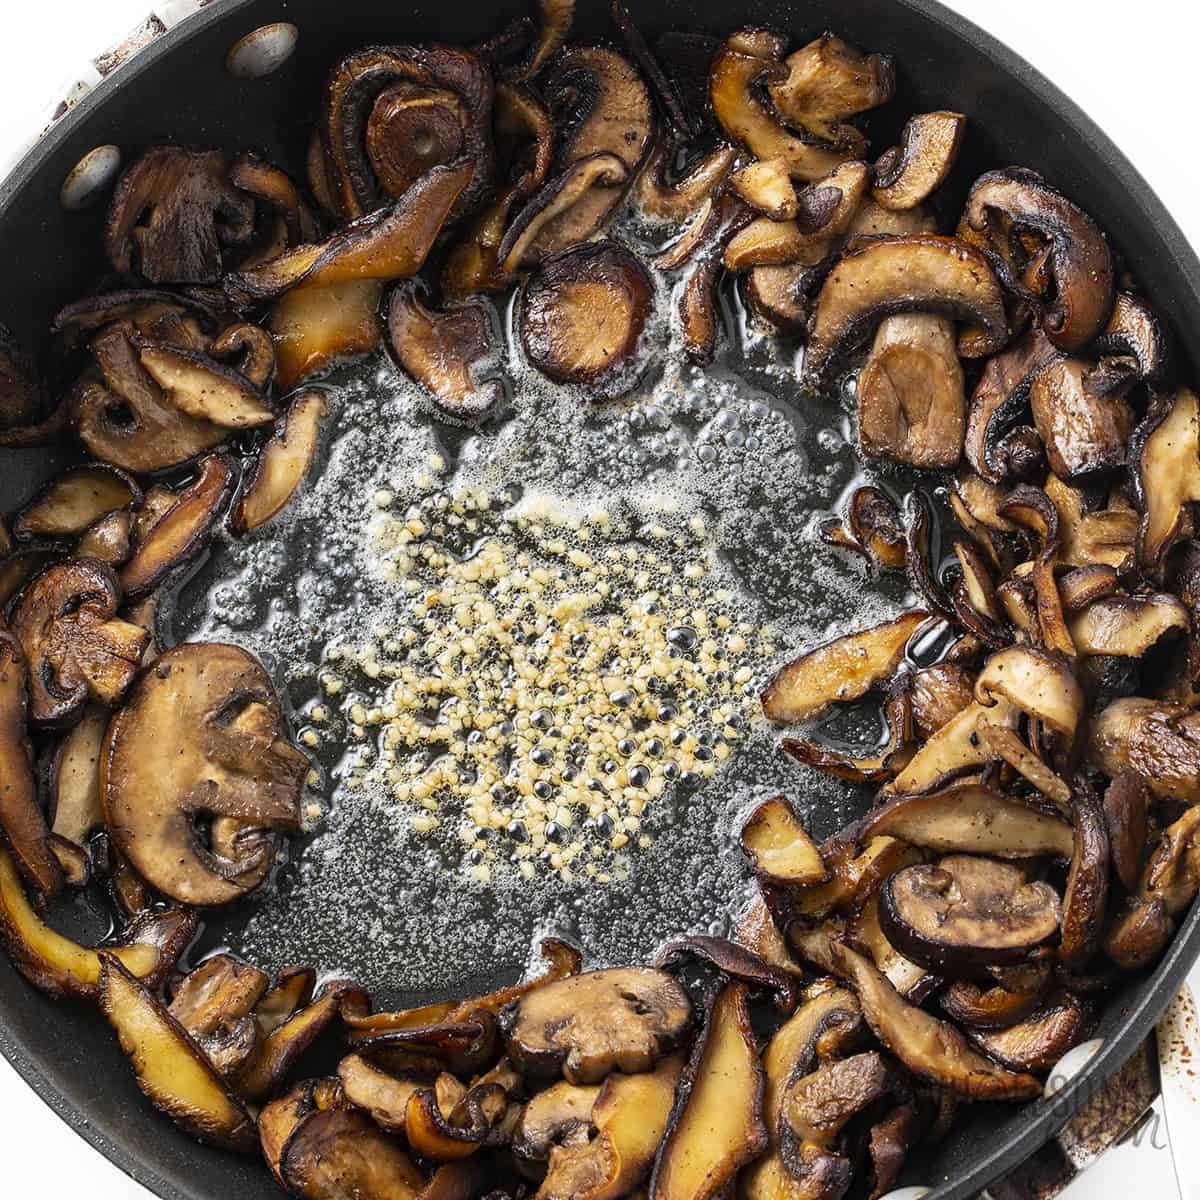 Sauteed mushrooms with garlic added in the center.